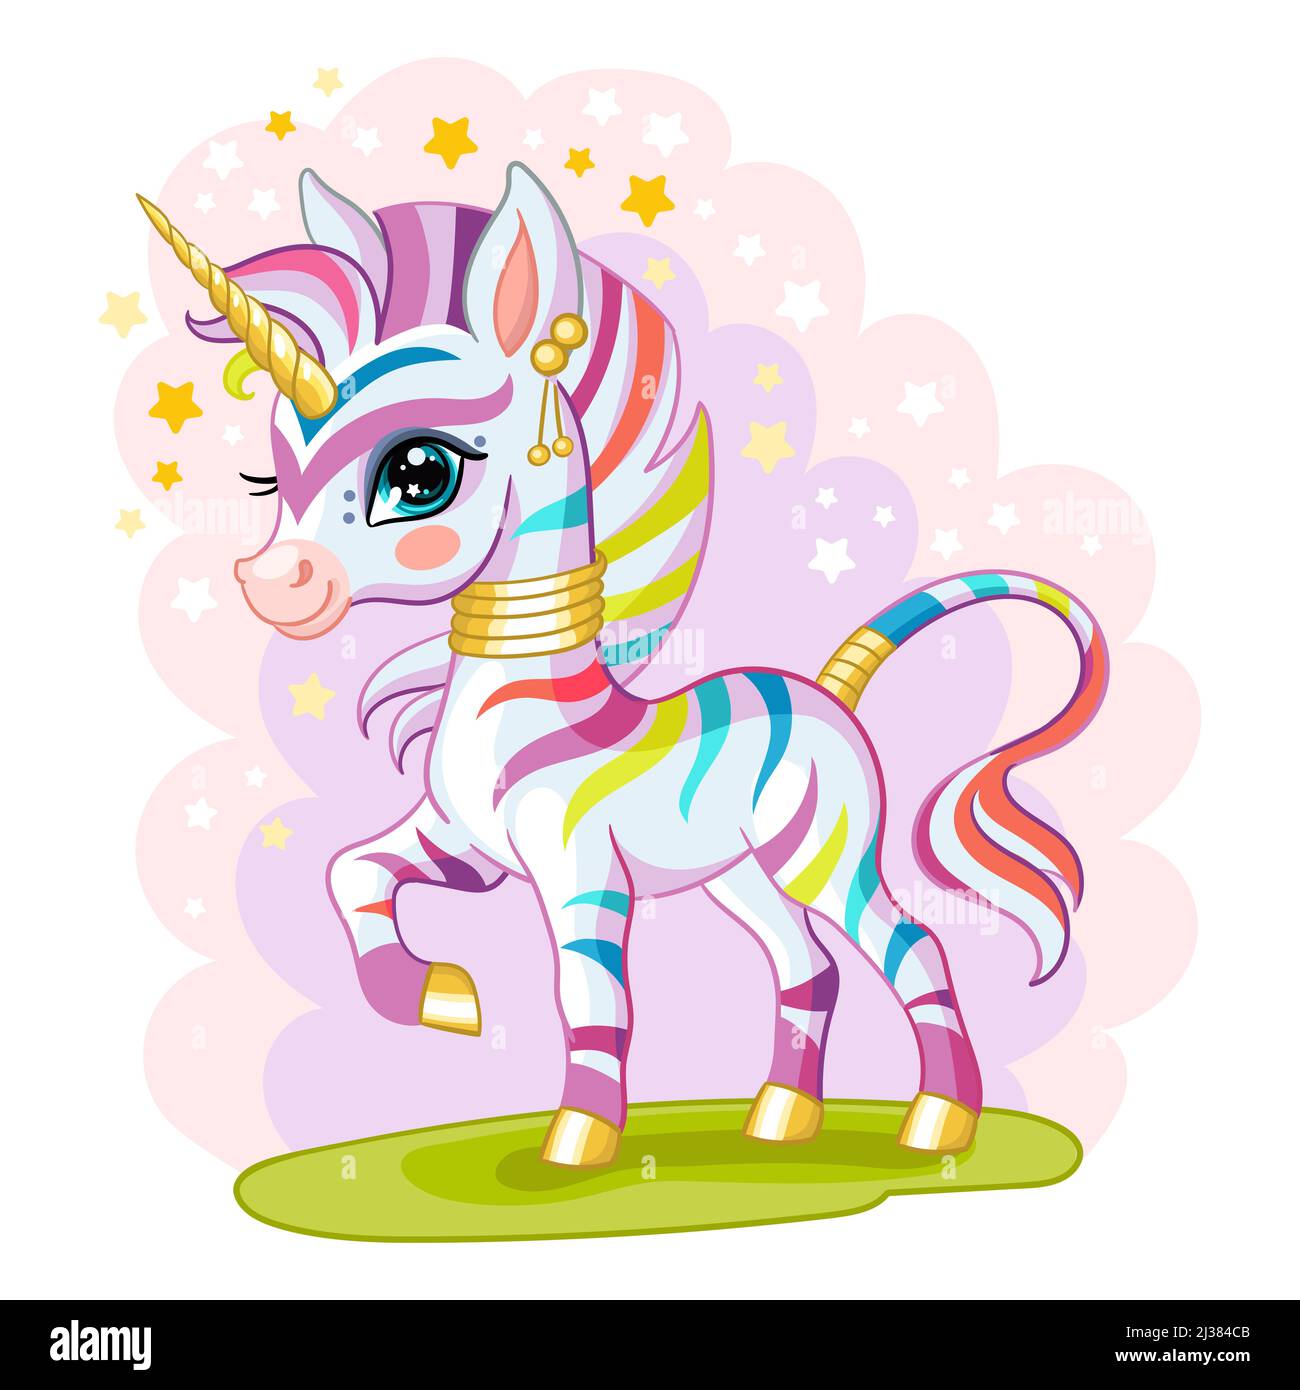 Funny standing magic rainbow zebra unicorn character. Cute animal in cartoon style. Vector illustration on pink background. For card, poster,design, s Stock Vector